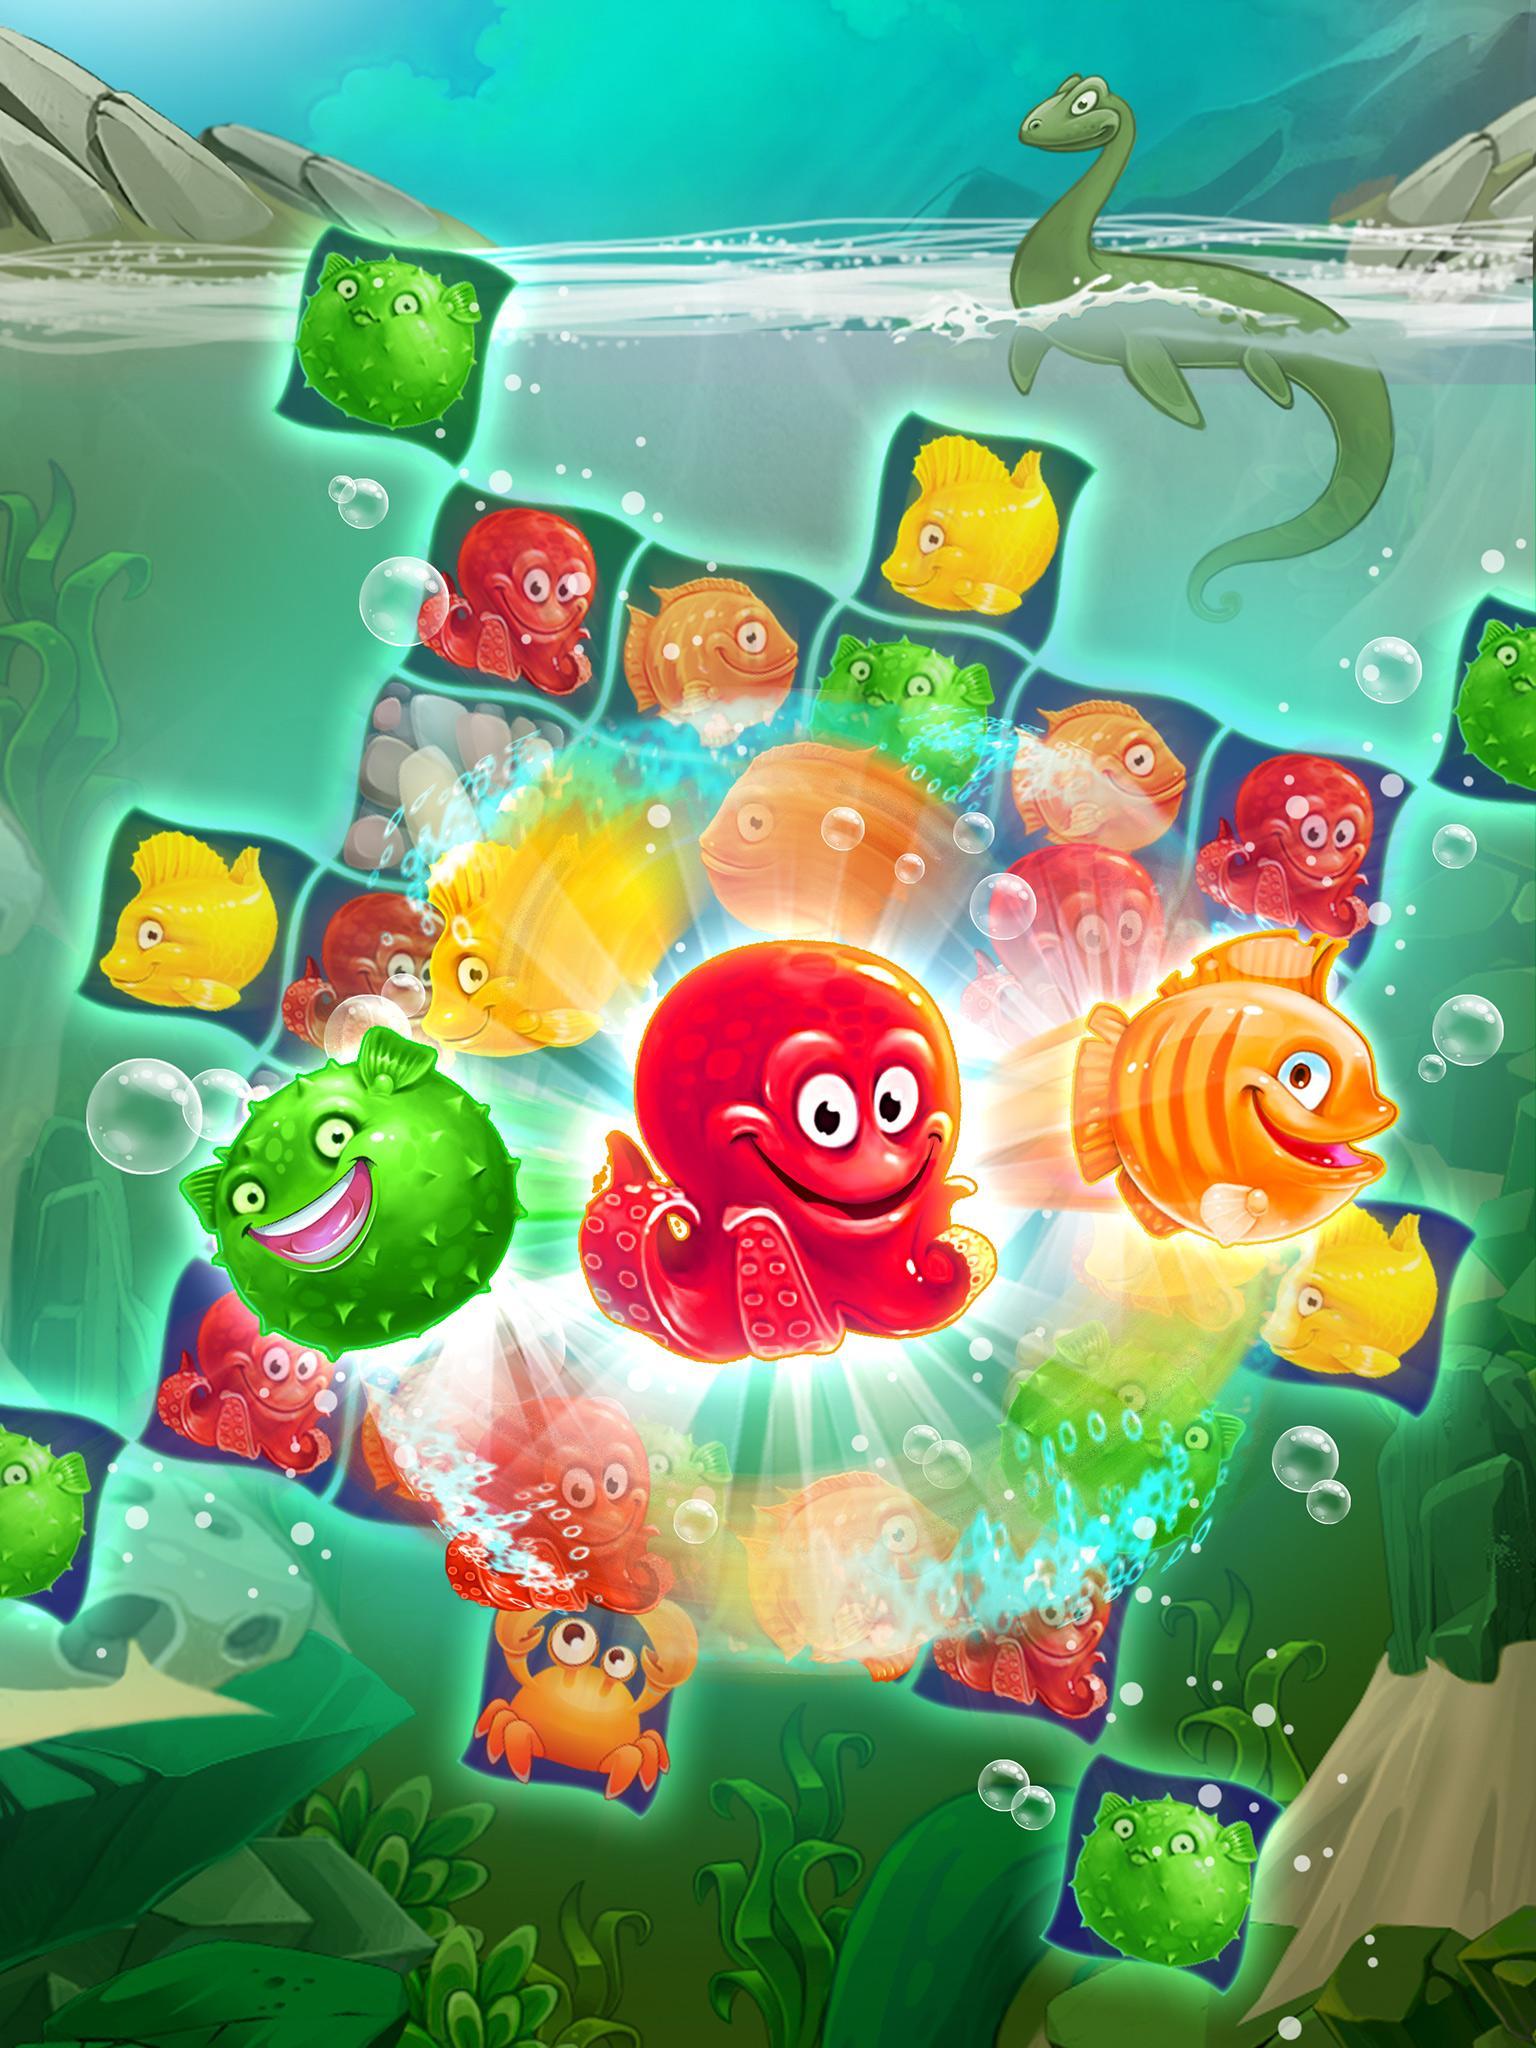 Mermaid for Android - APK Download